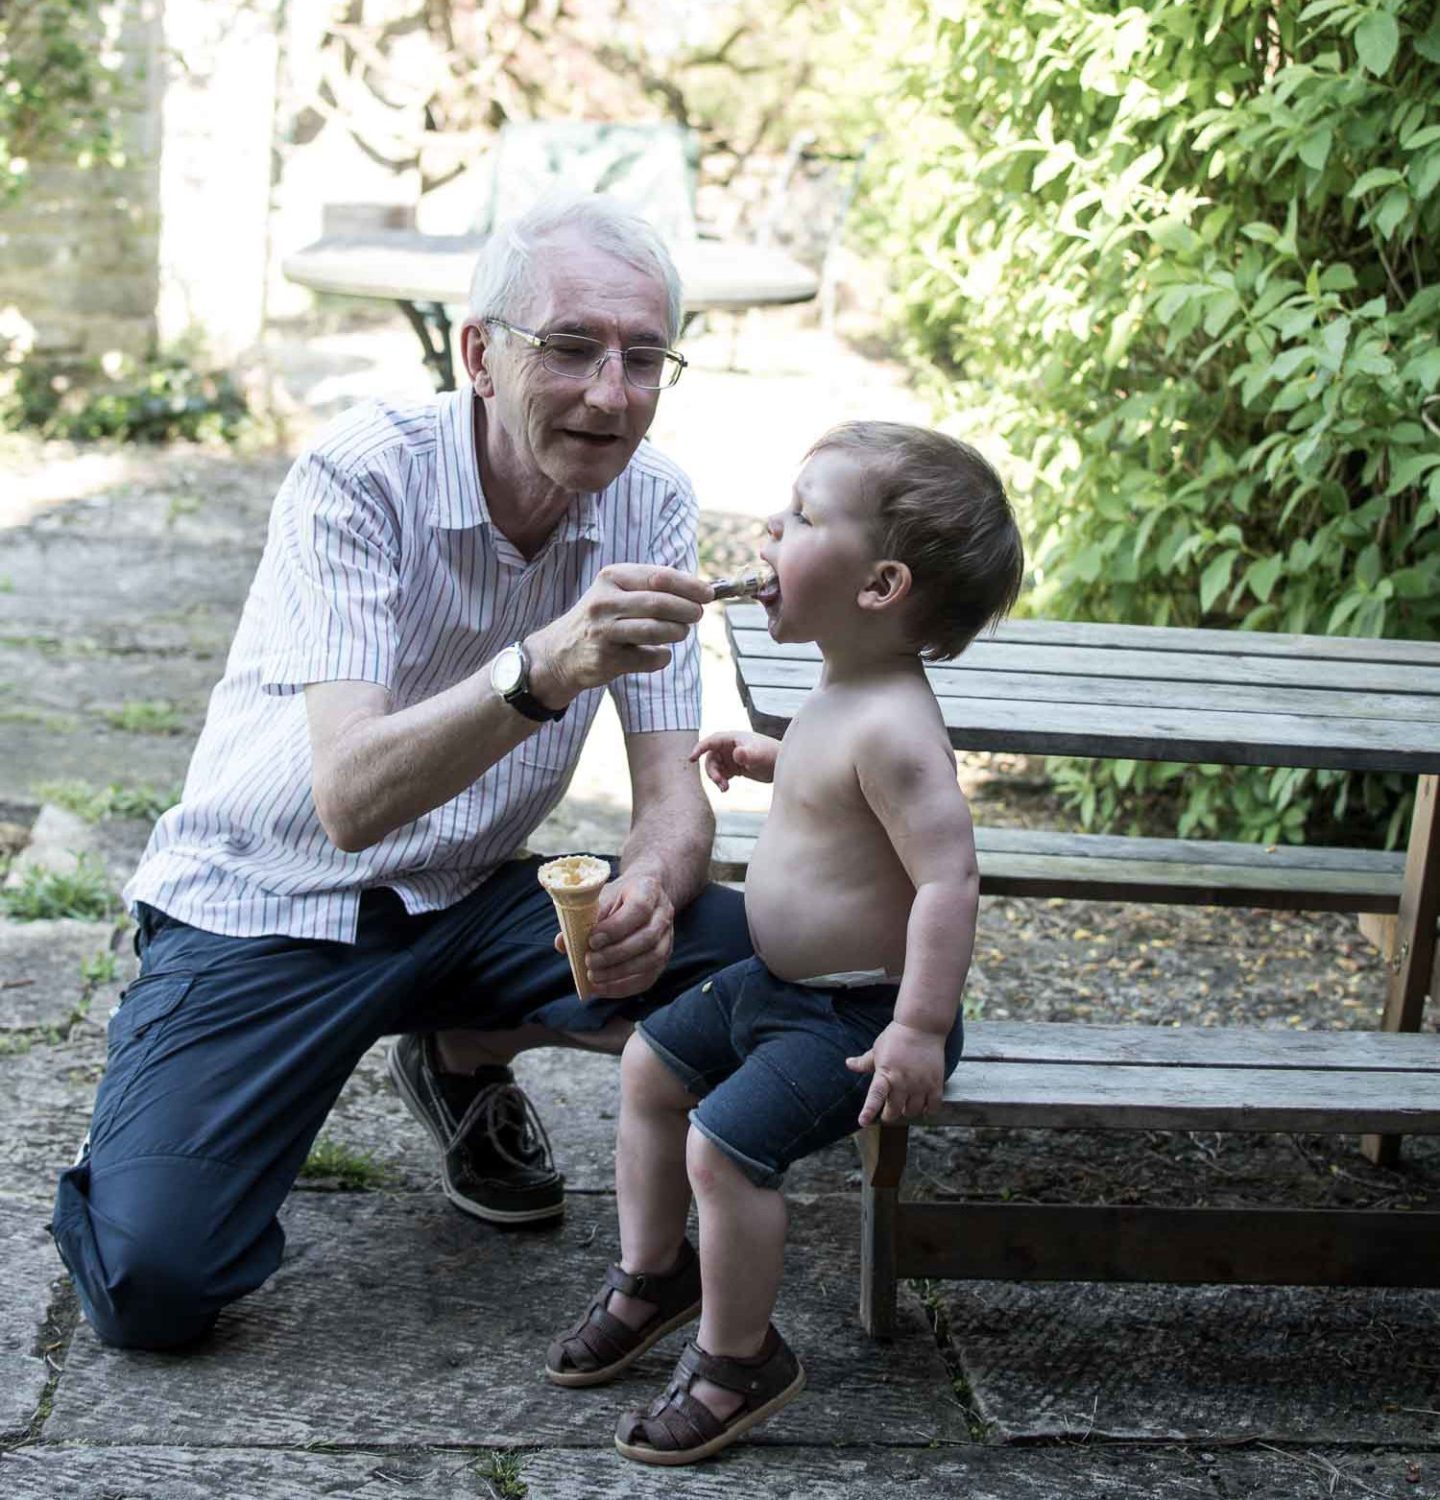 Laurie and his Grandad eating icecream